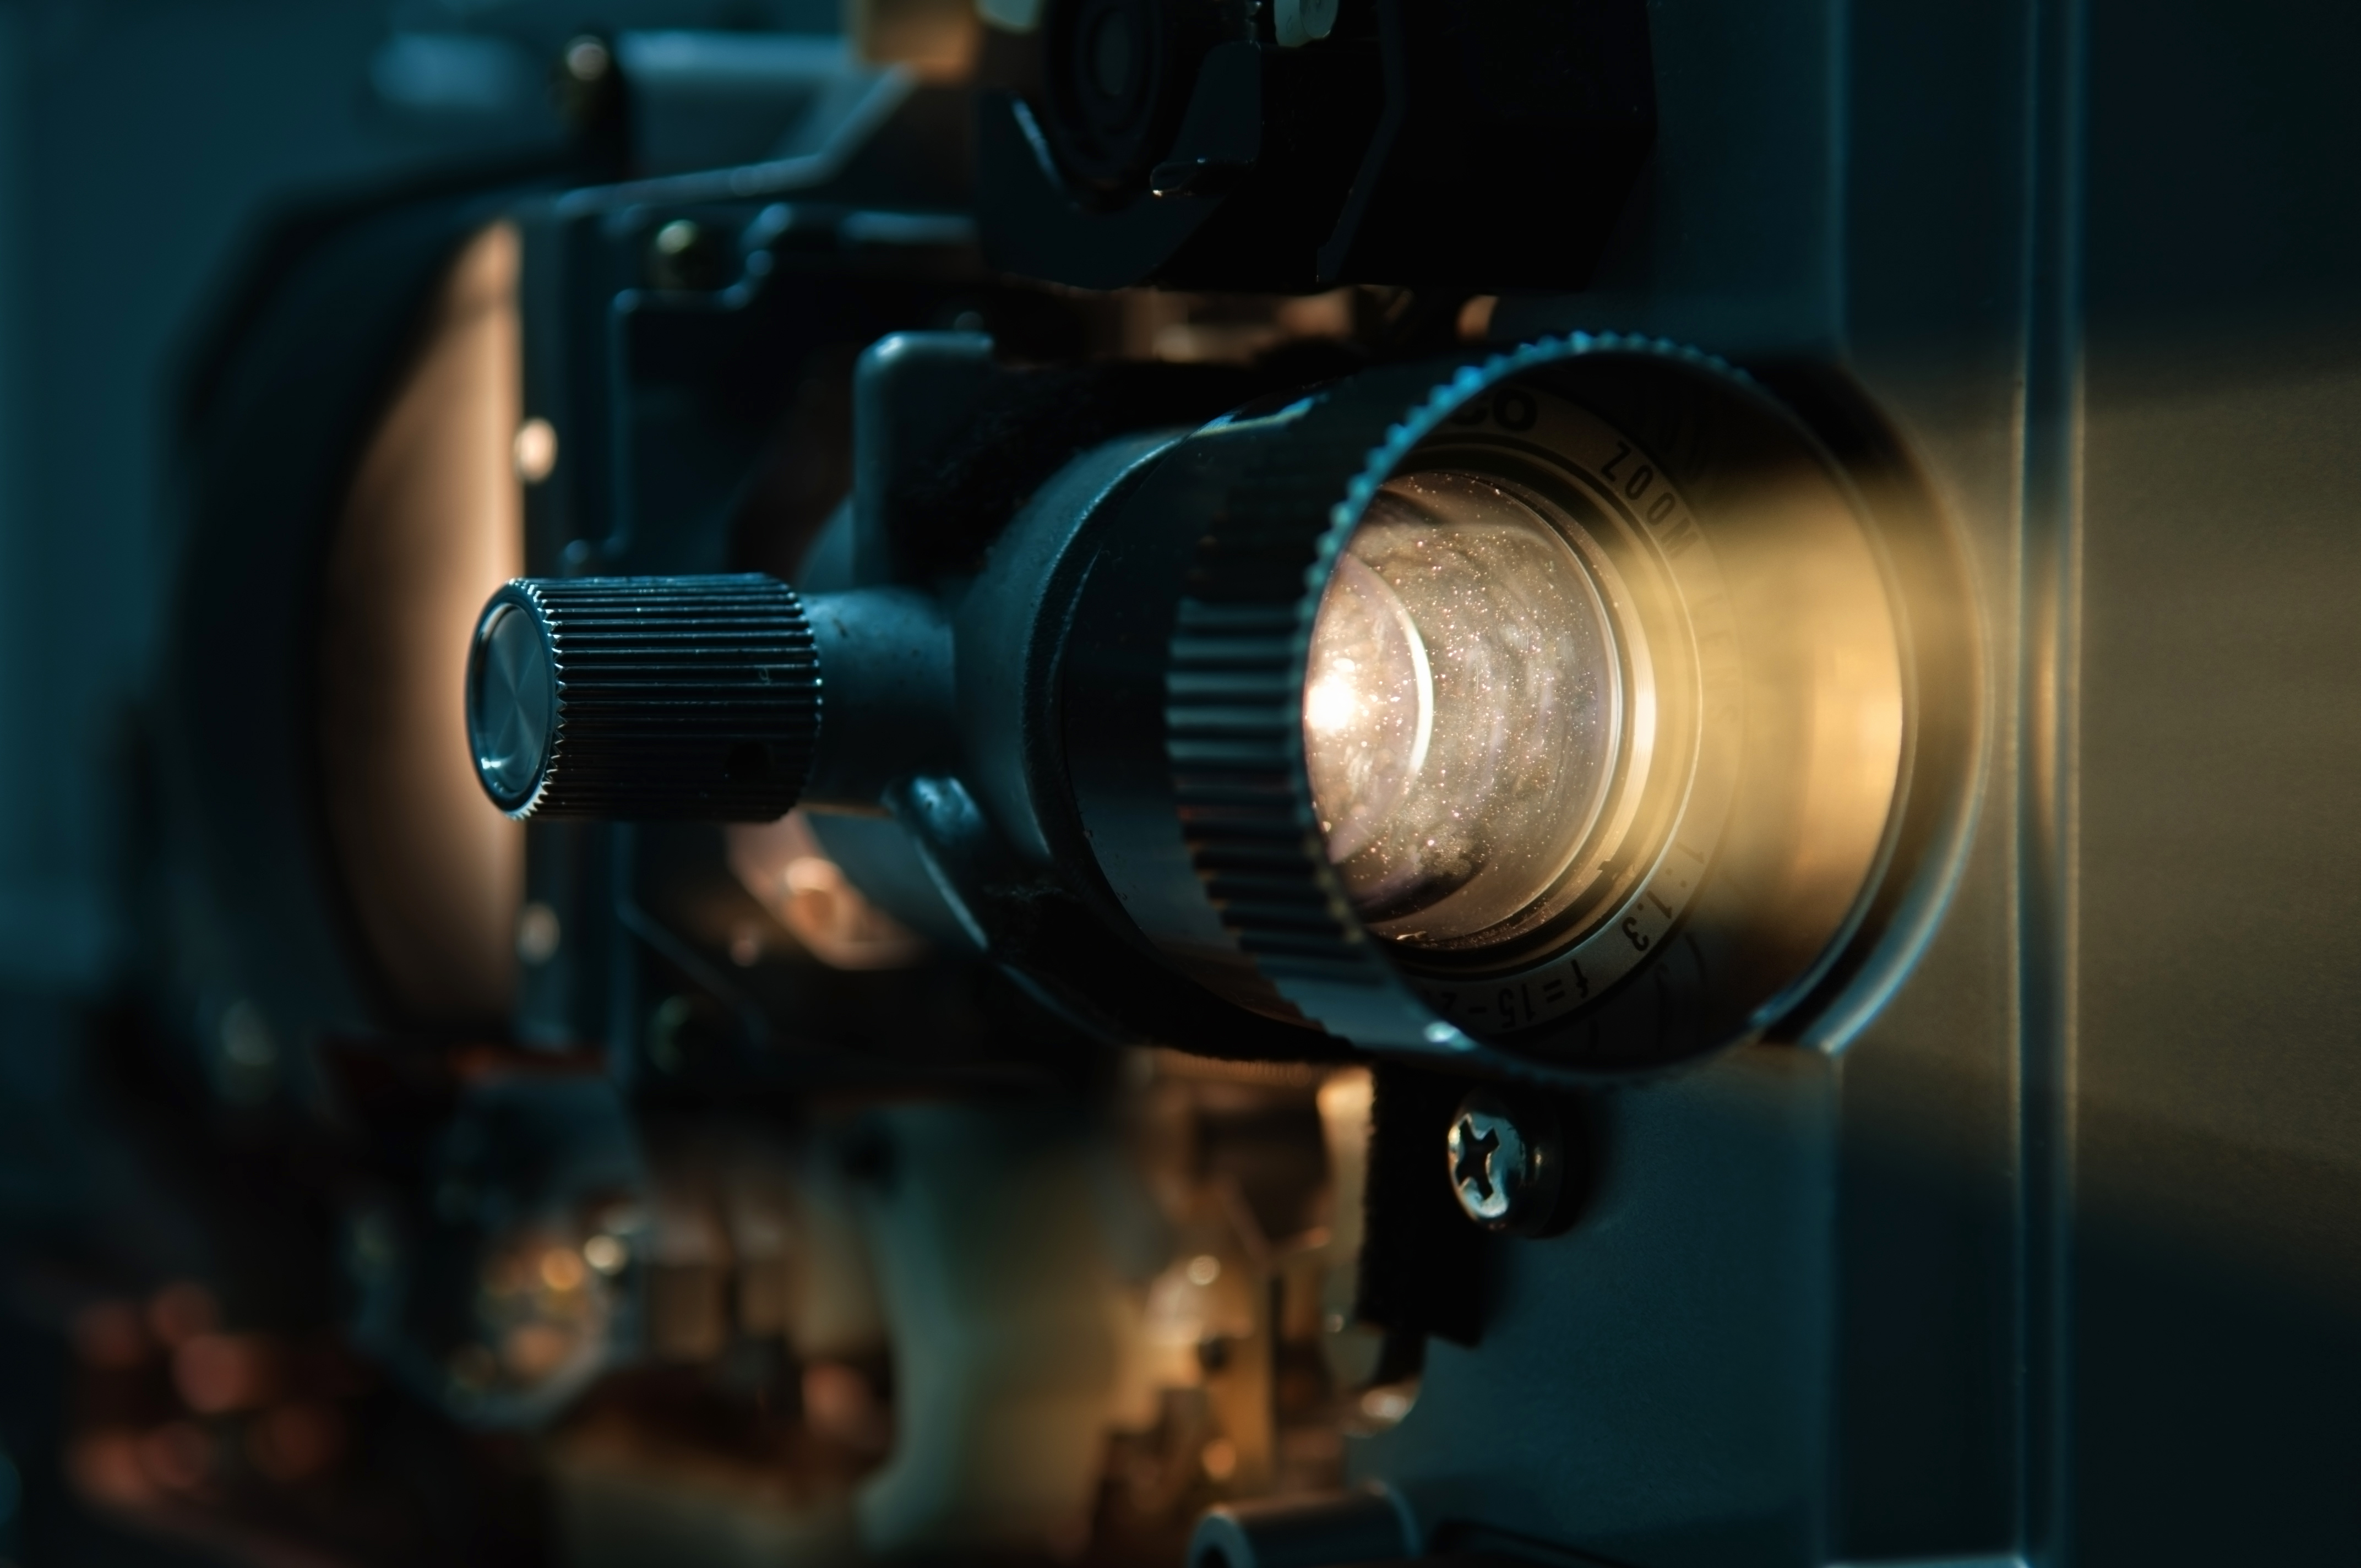 A close up photo of a cinema projector